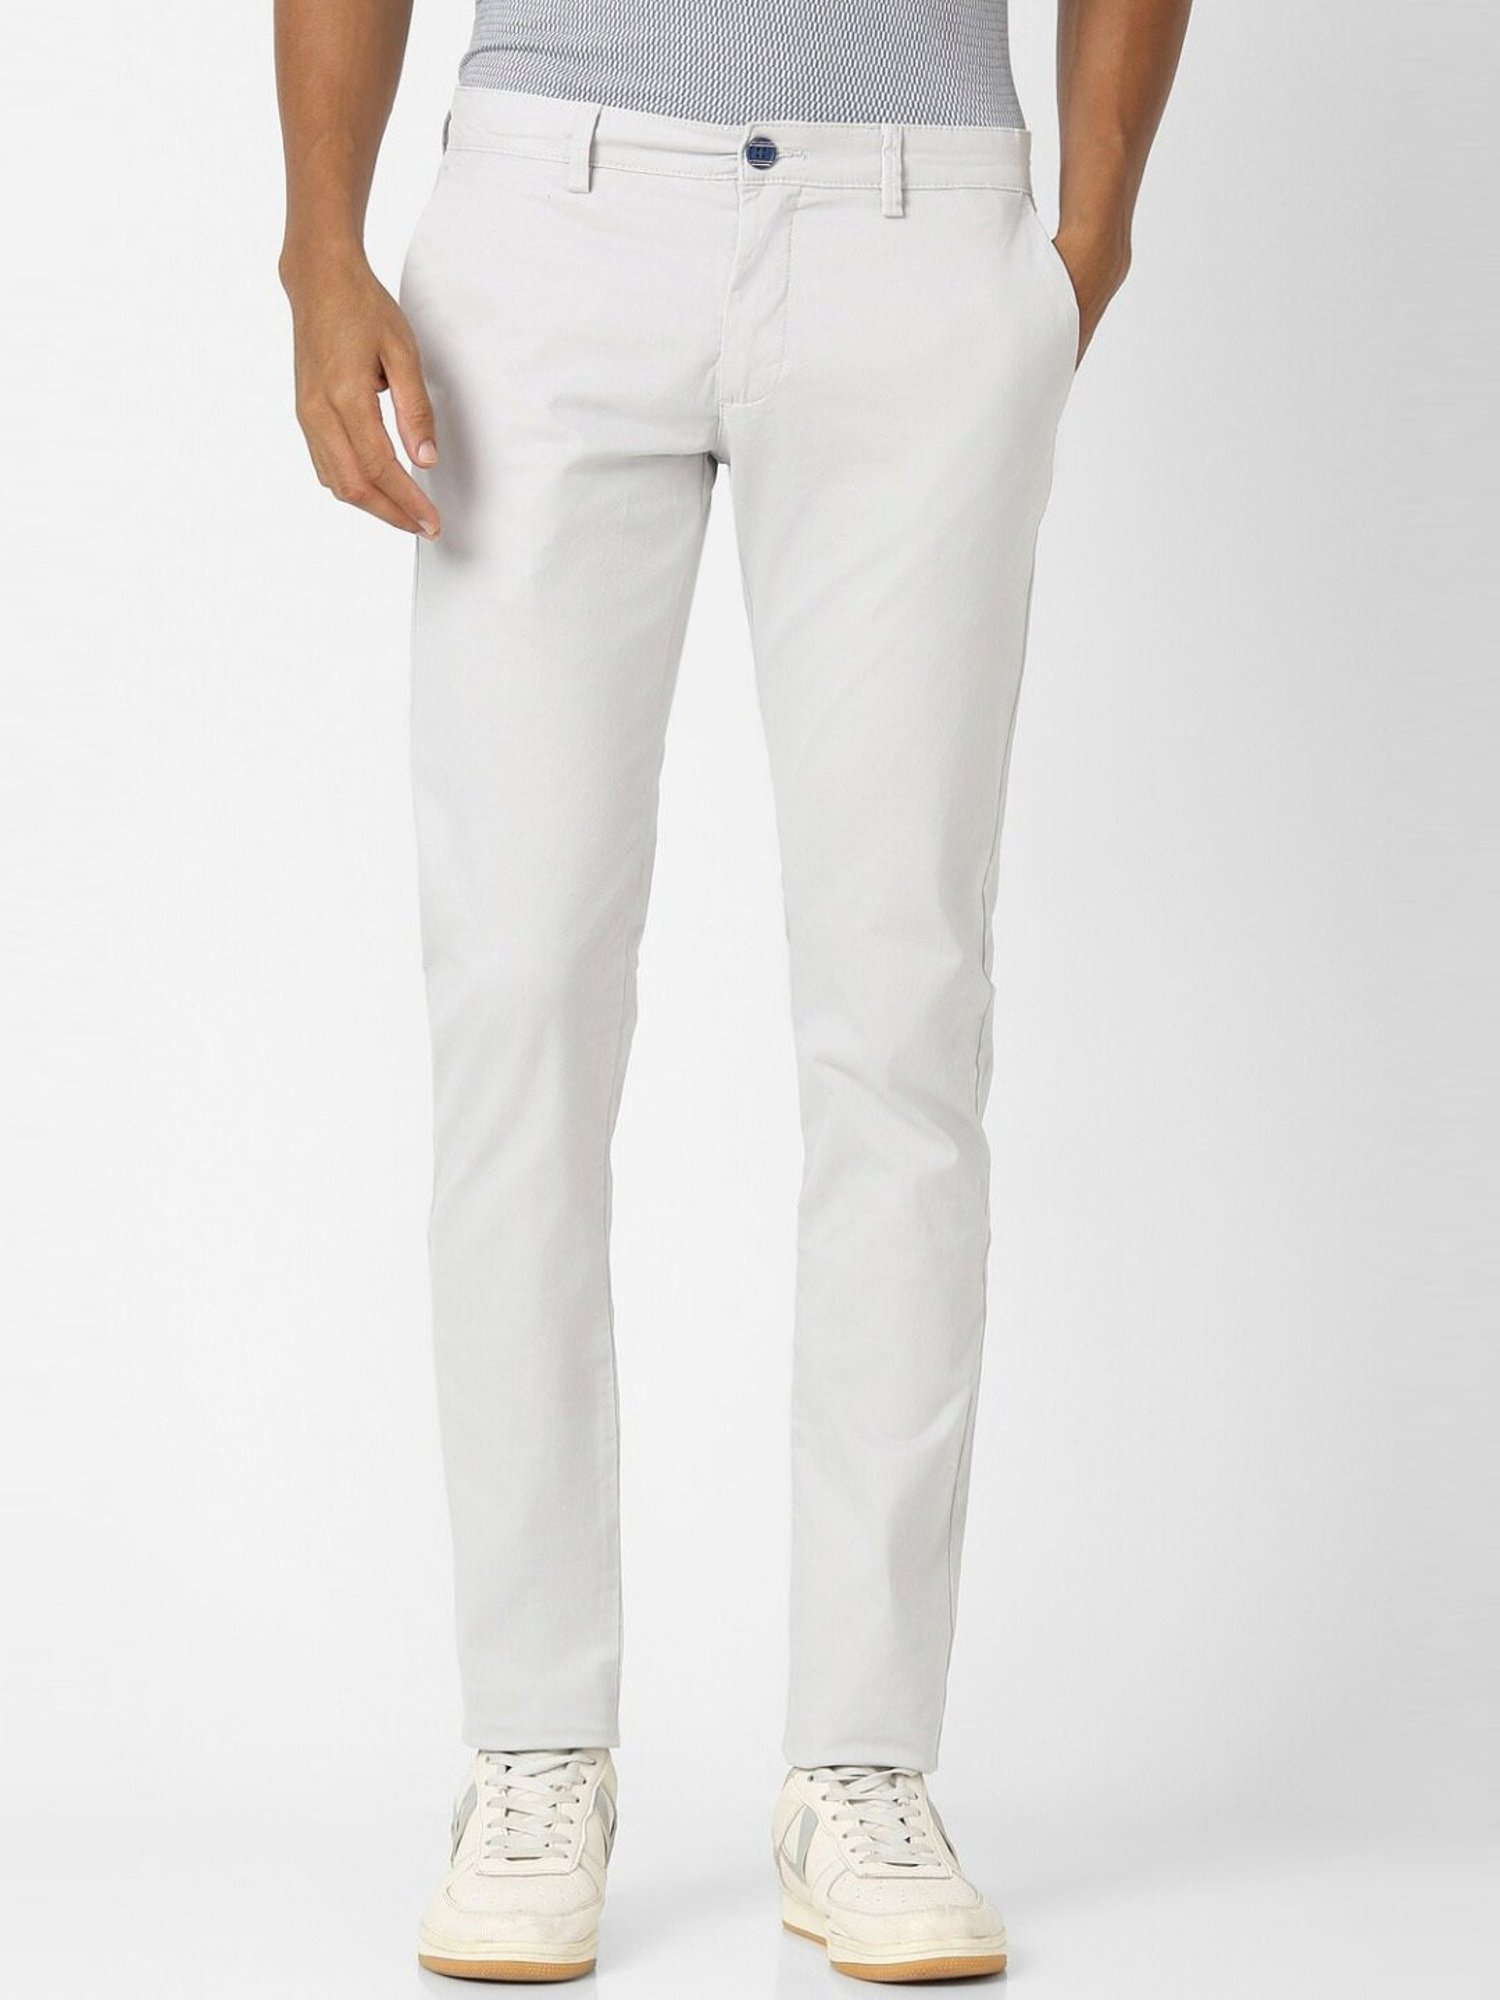 Buy White Trousers  Pants for Men by The Indian Garage Co Online  Ajiocom